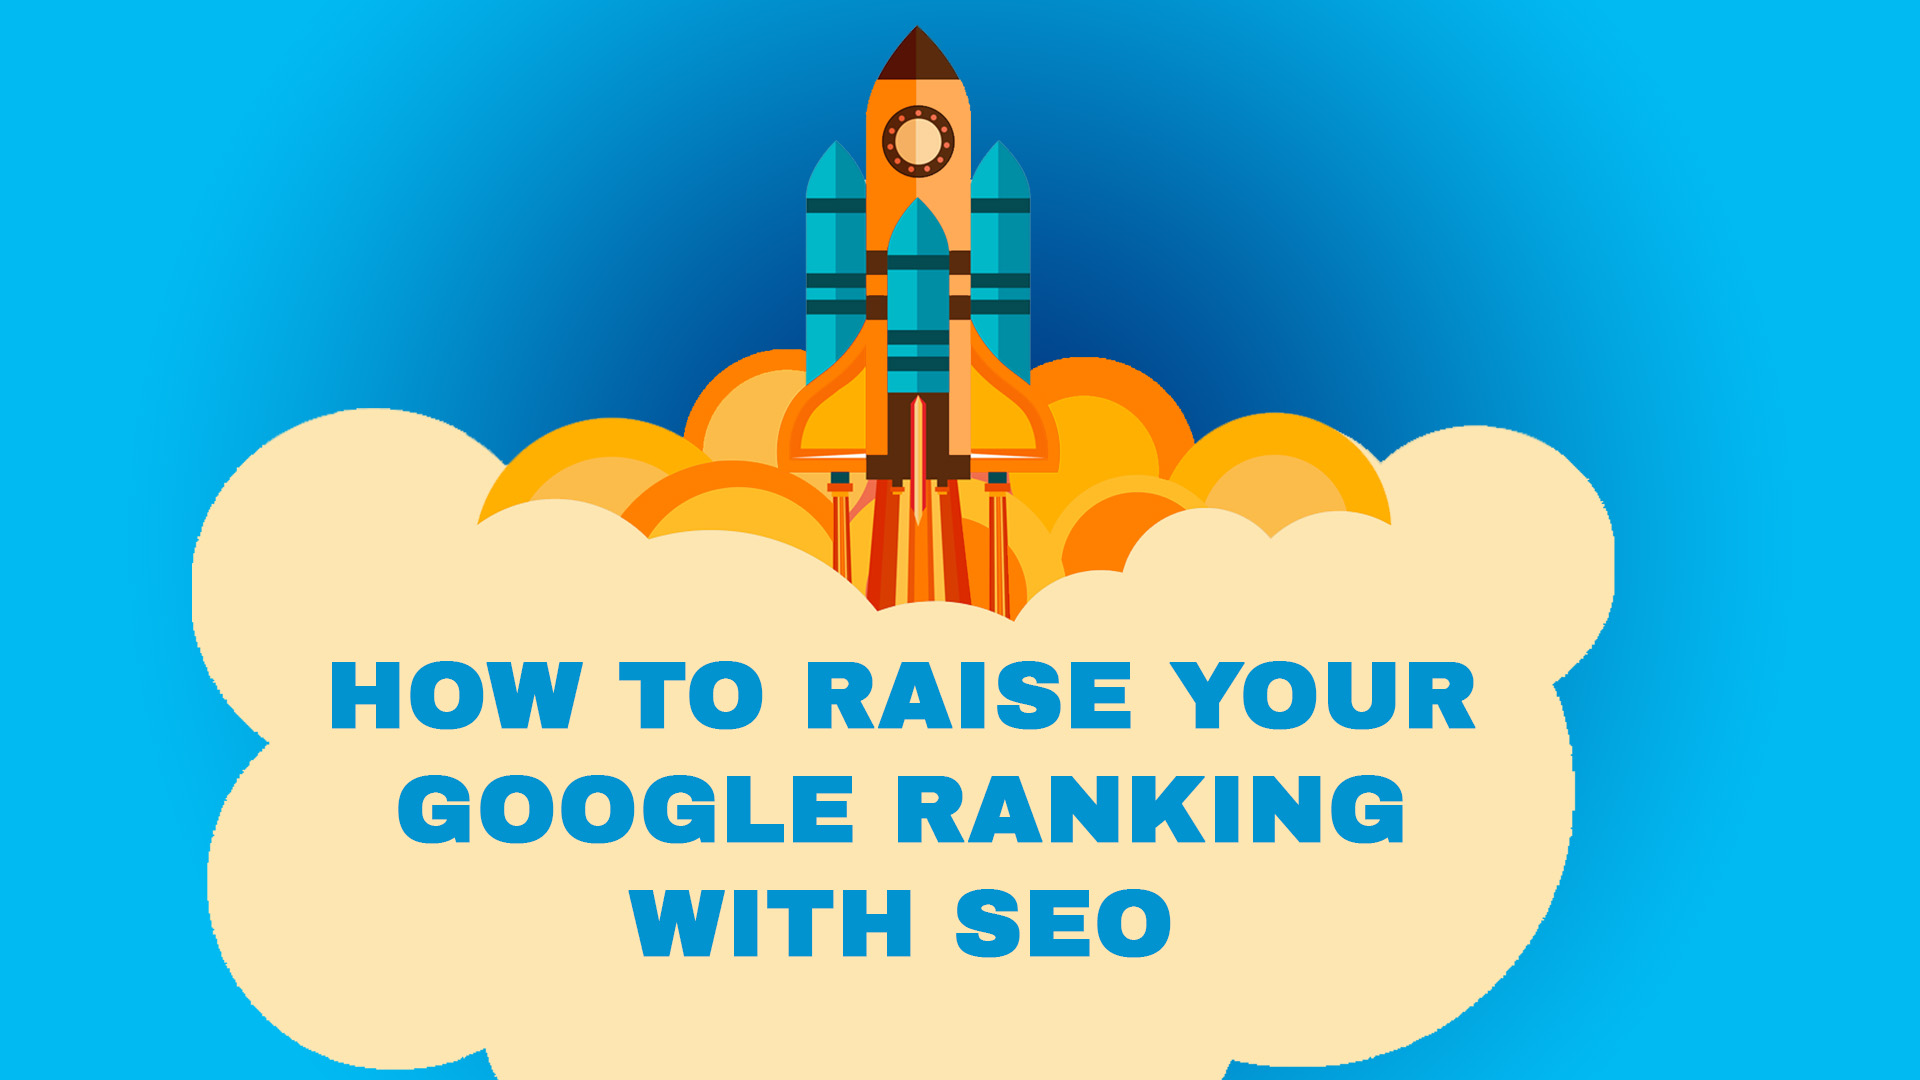 HOW TO RAISE YOUR GOOGLE RANKING WITH SEO